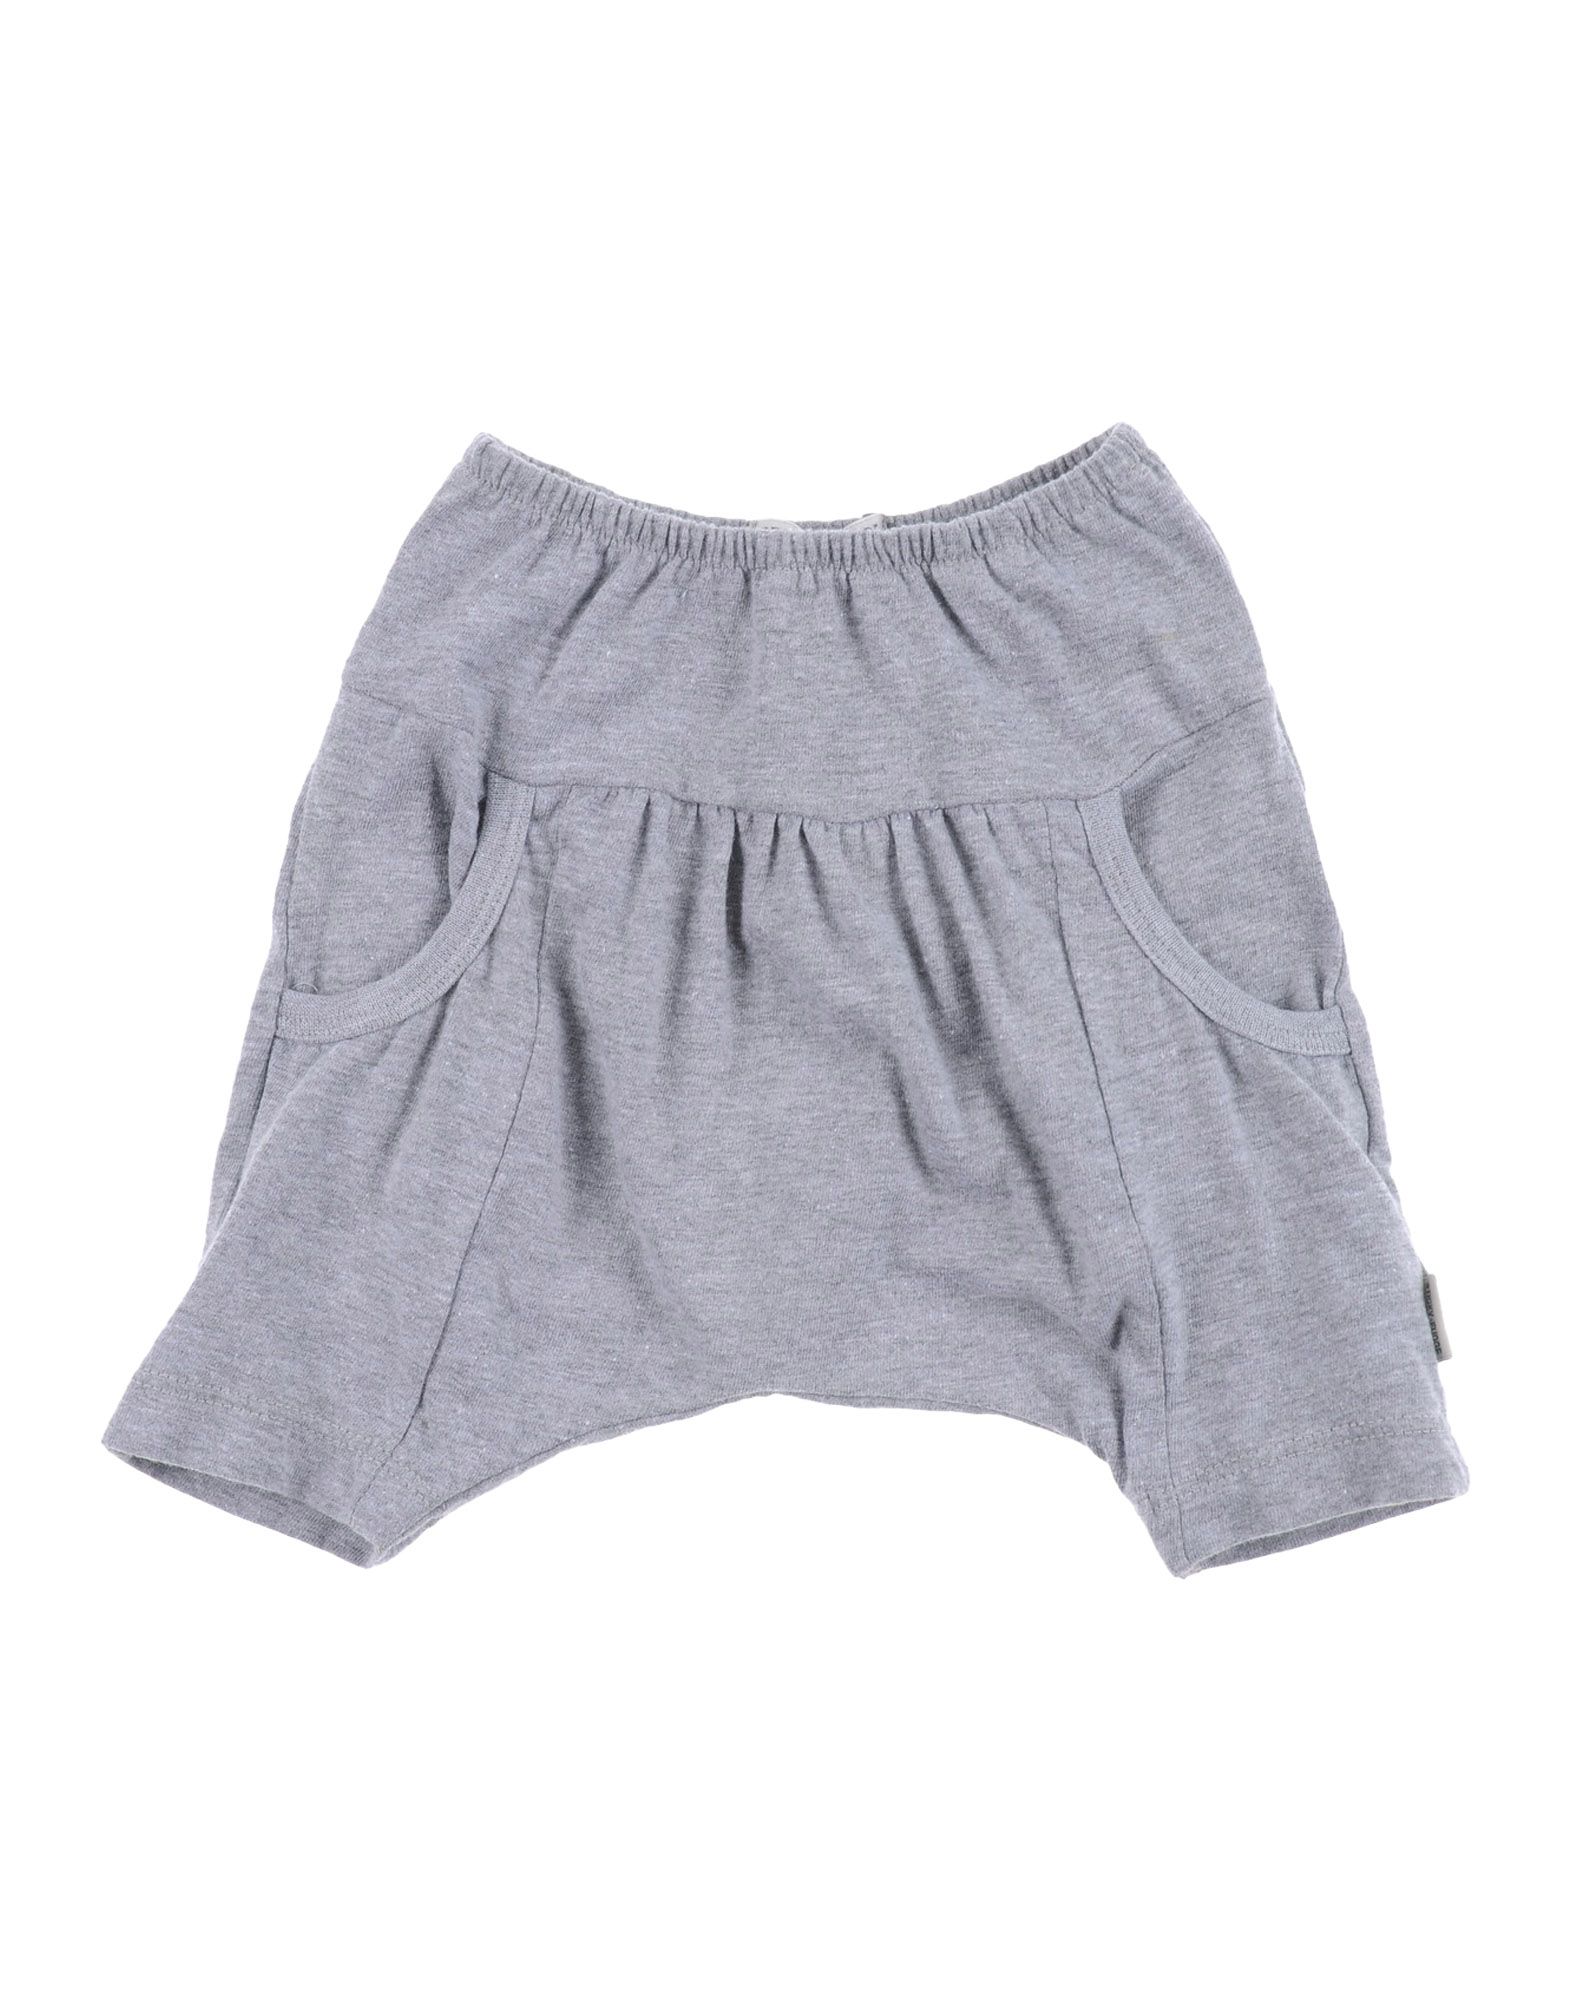 Sticky Fudge Babies' Pants In Grey